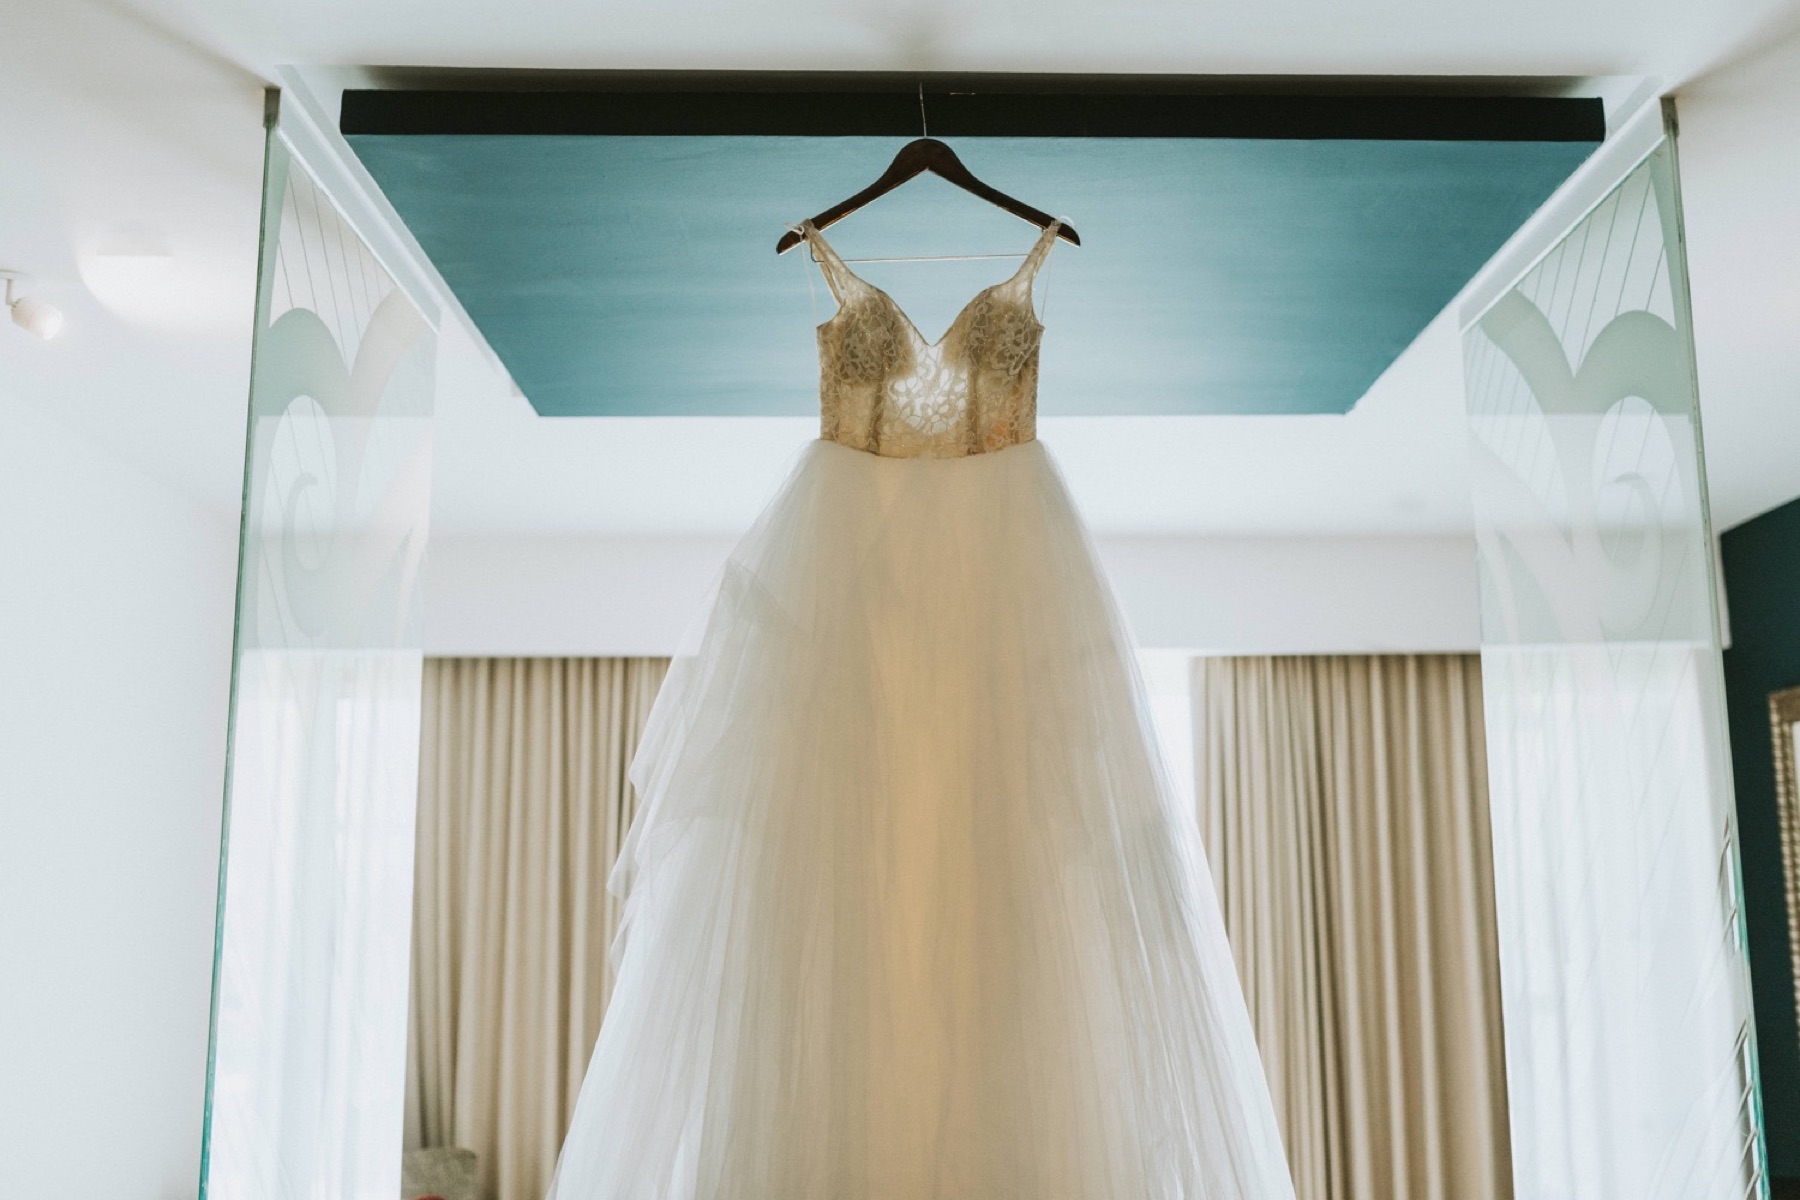 The brides wedding dress hanging in the hotel room at Hard Rock Punta Cana